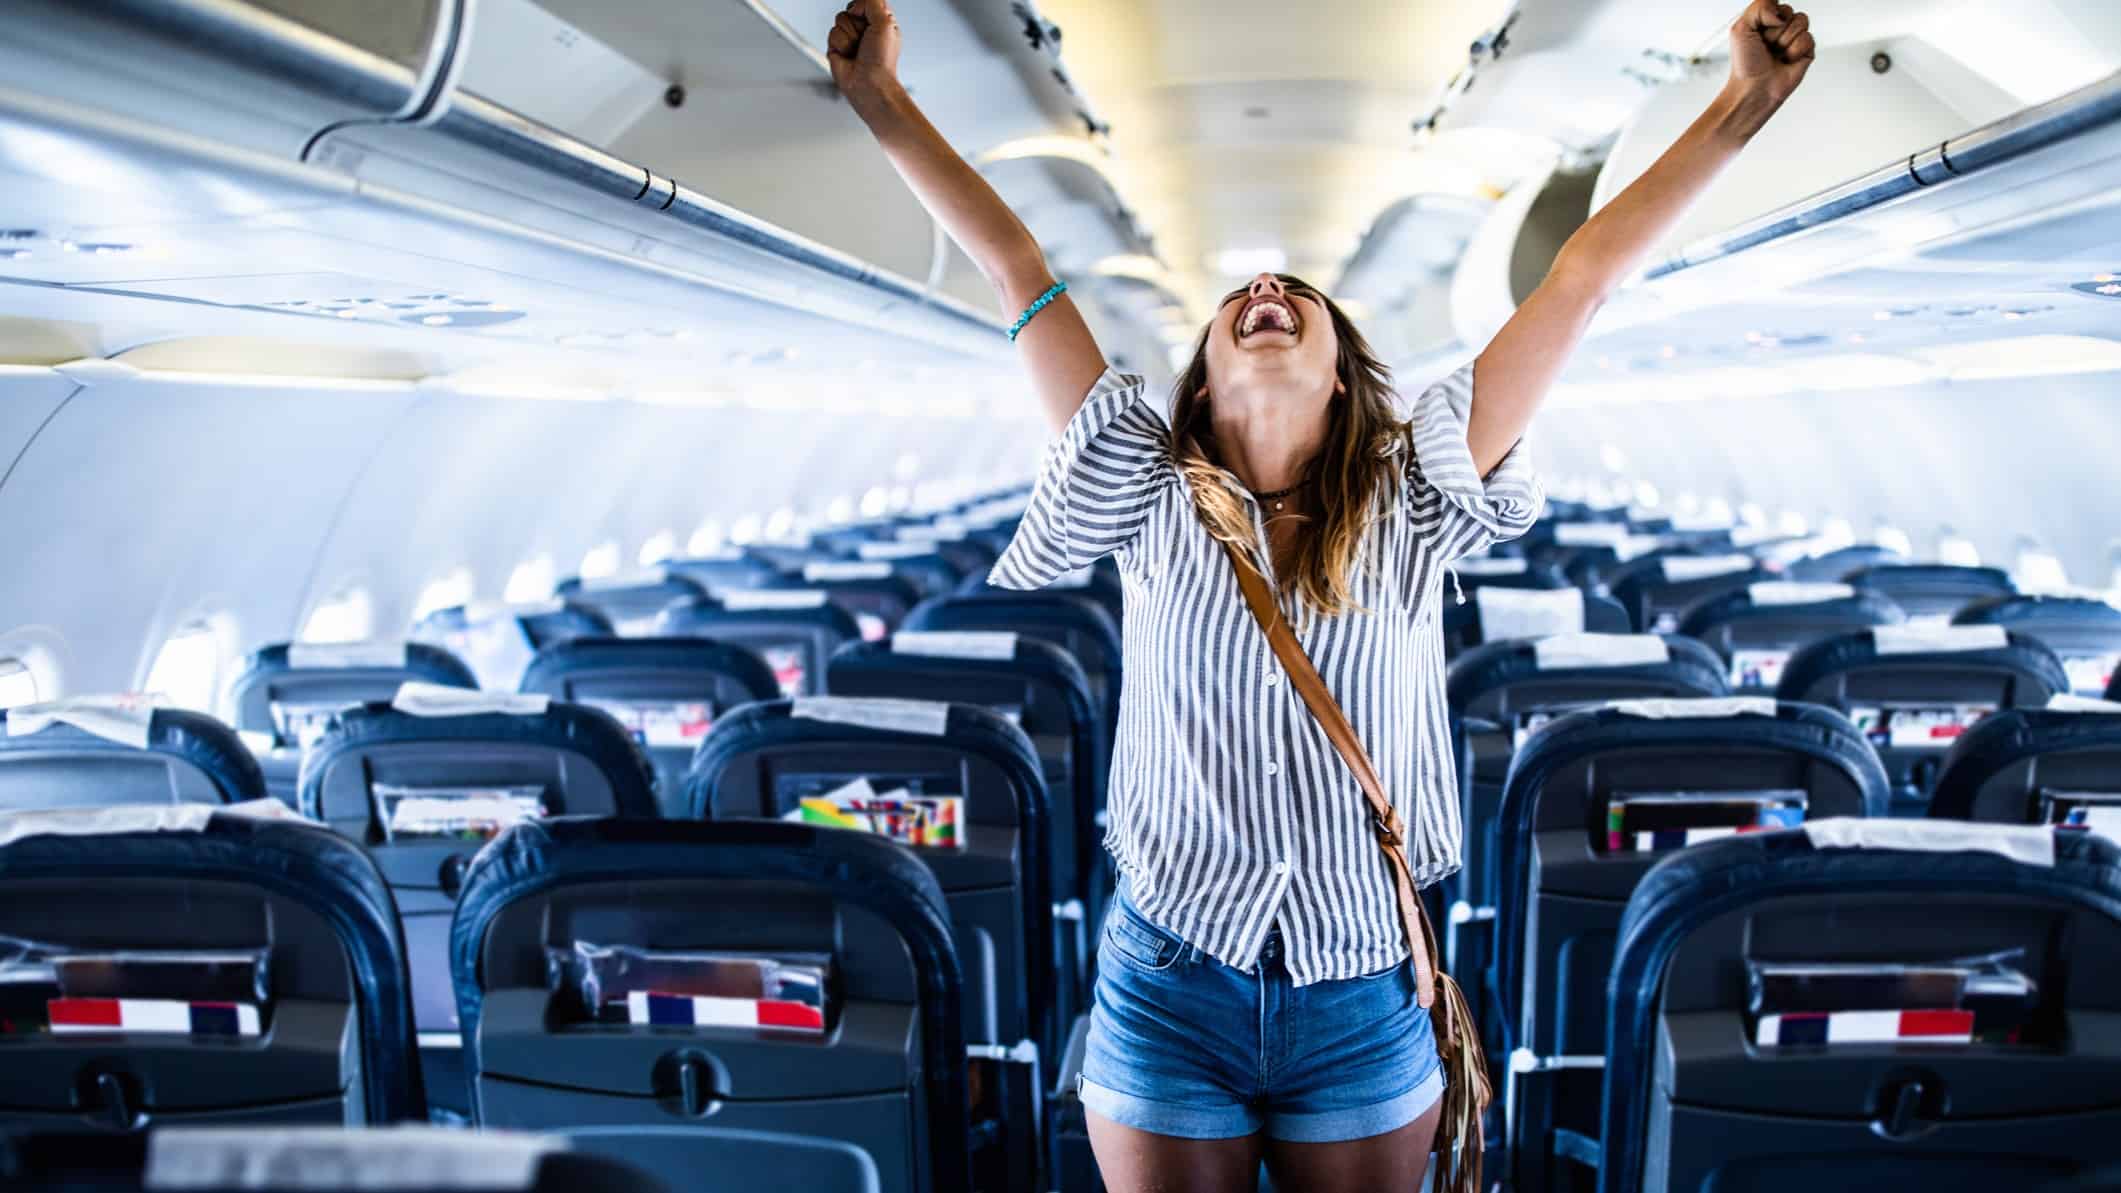 A woman wearing casual holiday attire stands with her head thrown back and her arms outstretched as if celebrating as she stands on board an empty plane with its rows of seats in the background.